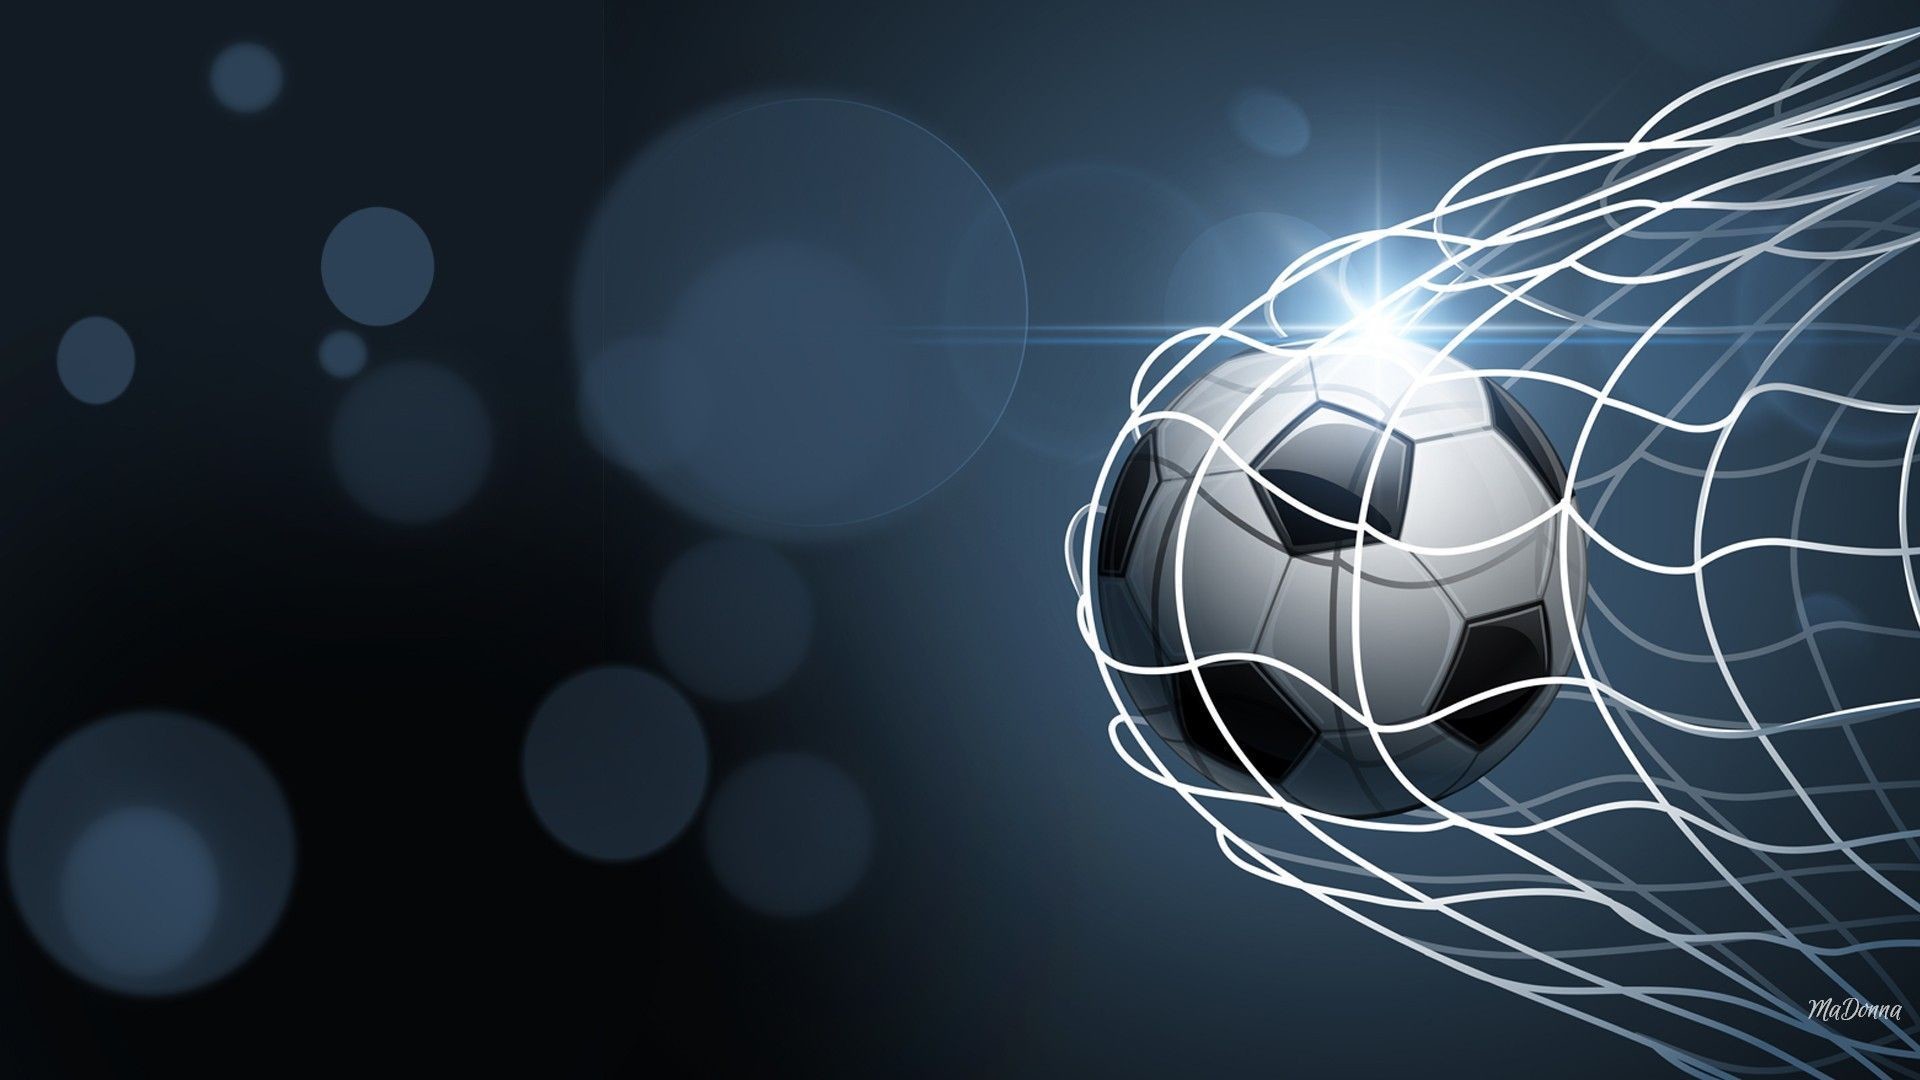 1920x1080 Top Soccer Goal Net With Images for Pinterest